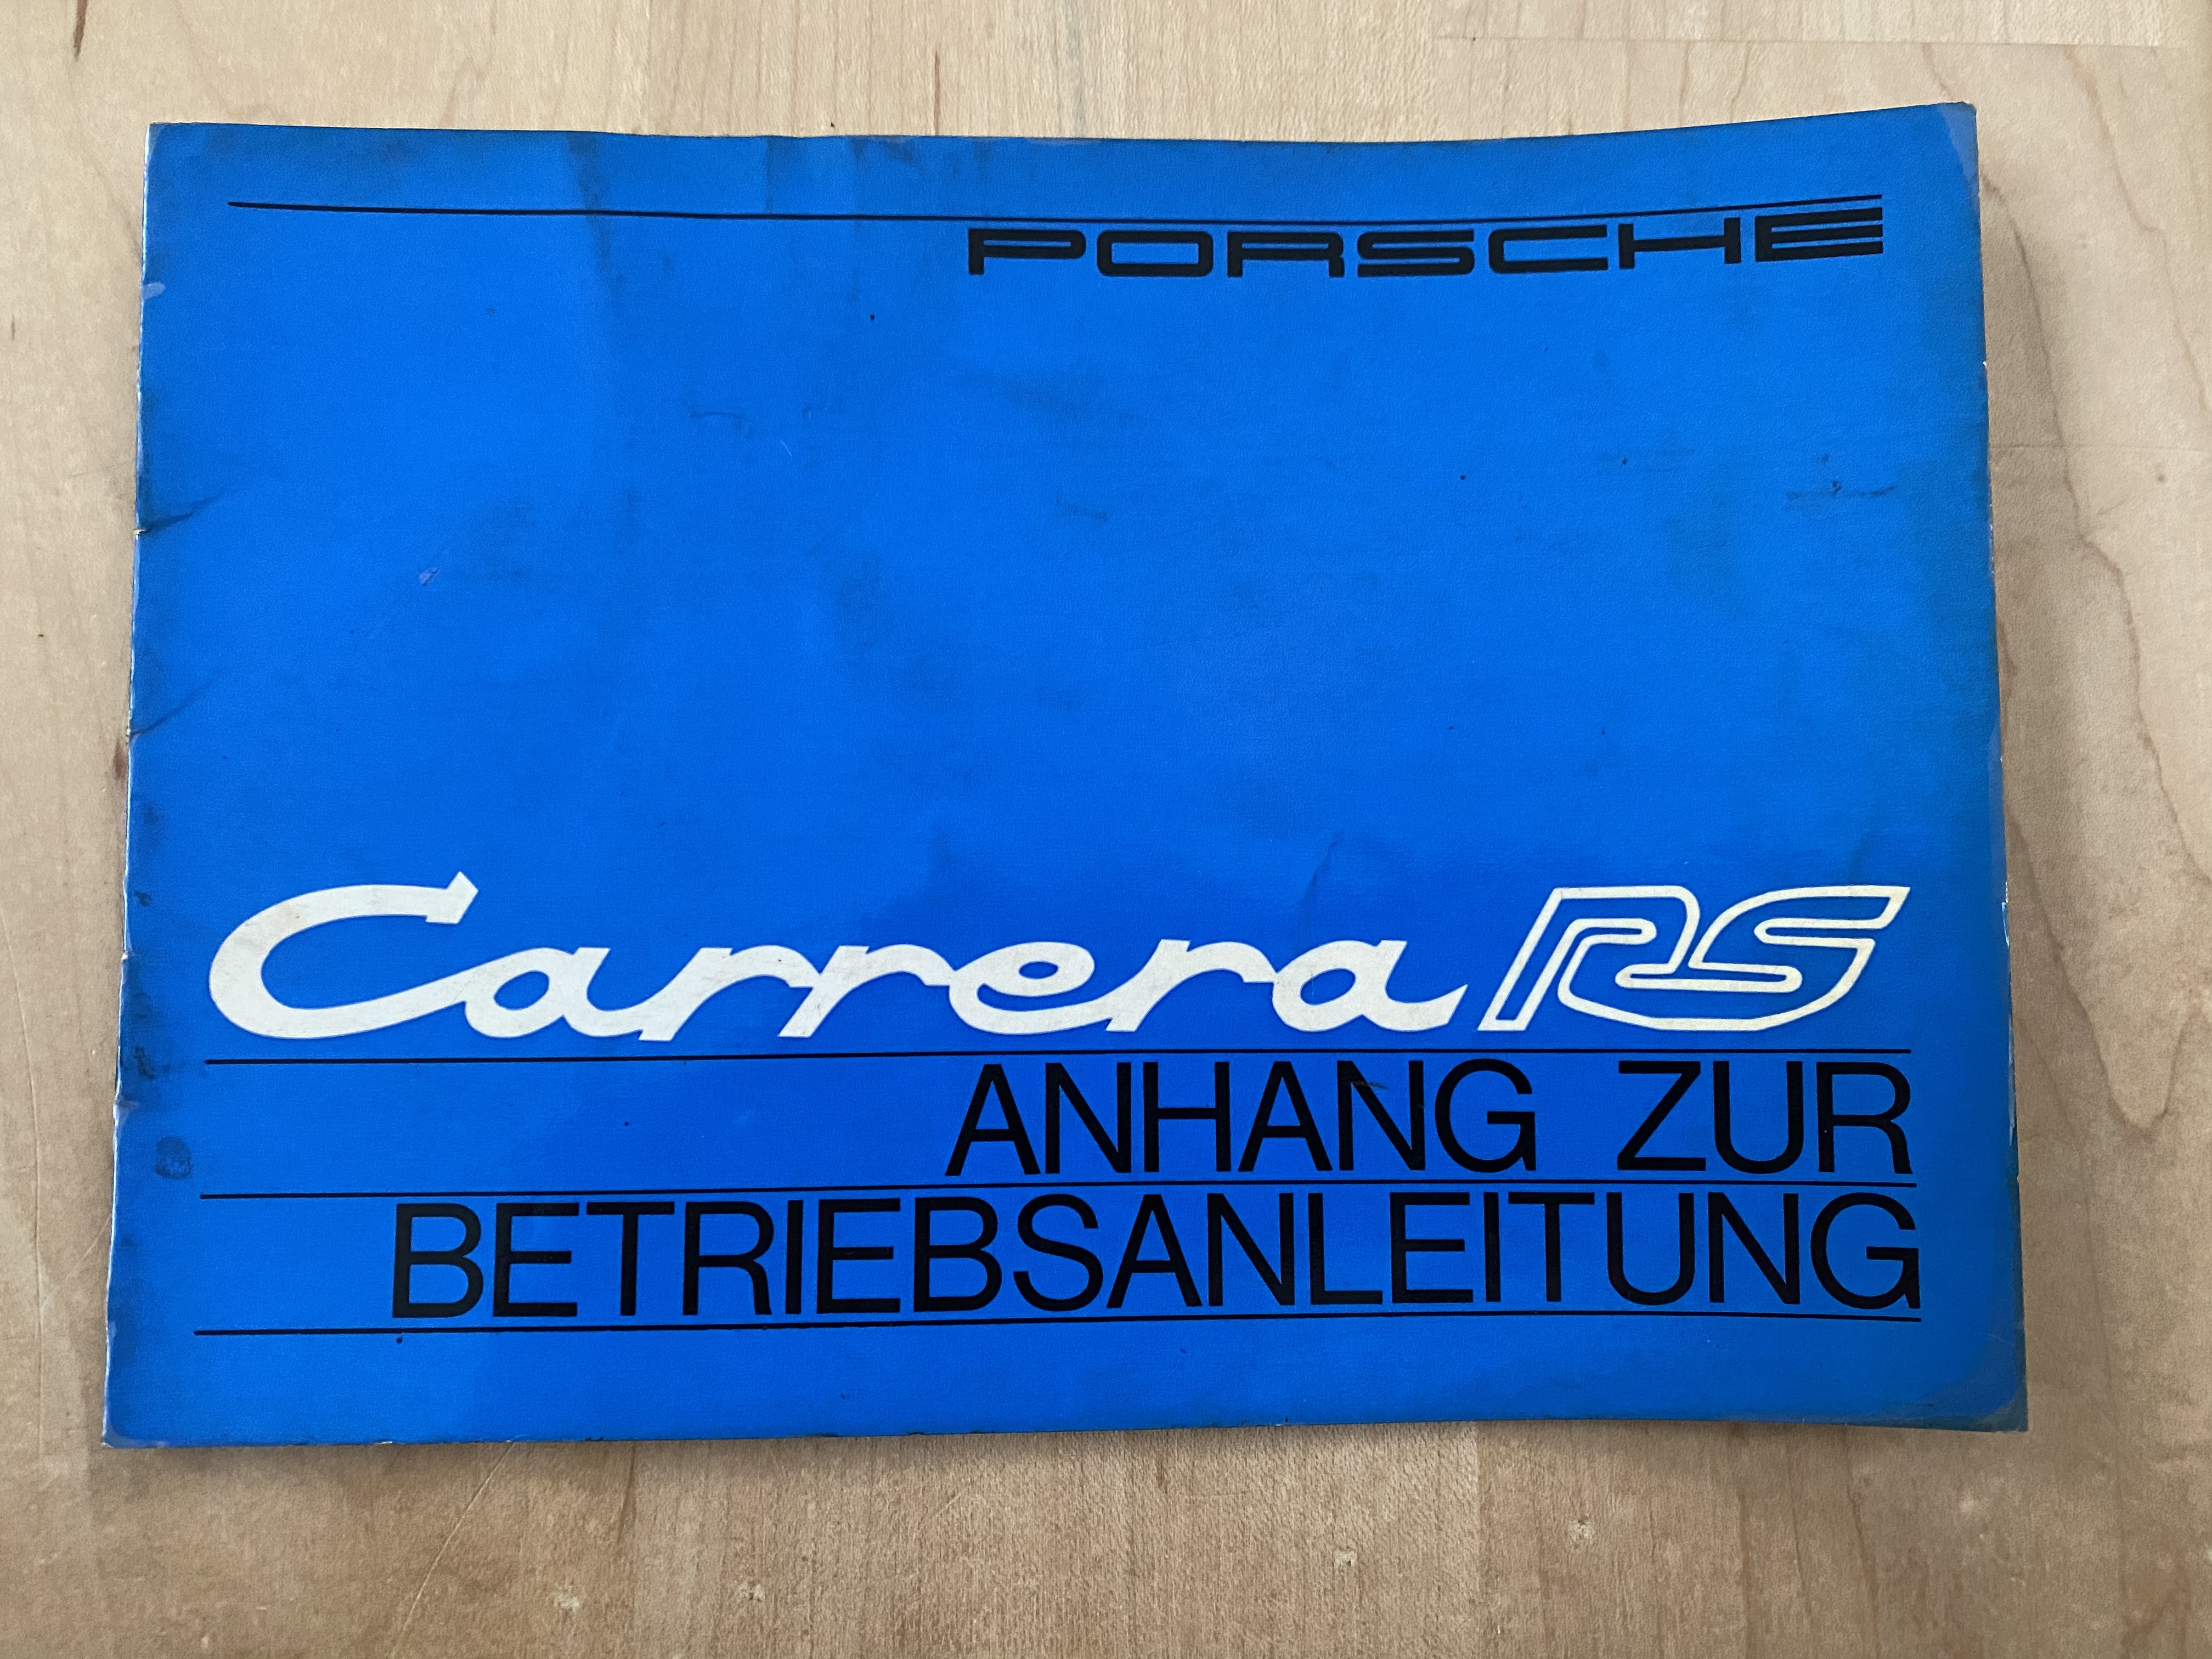 1973 Porsche Carrera RS Owners Literature Collection